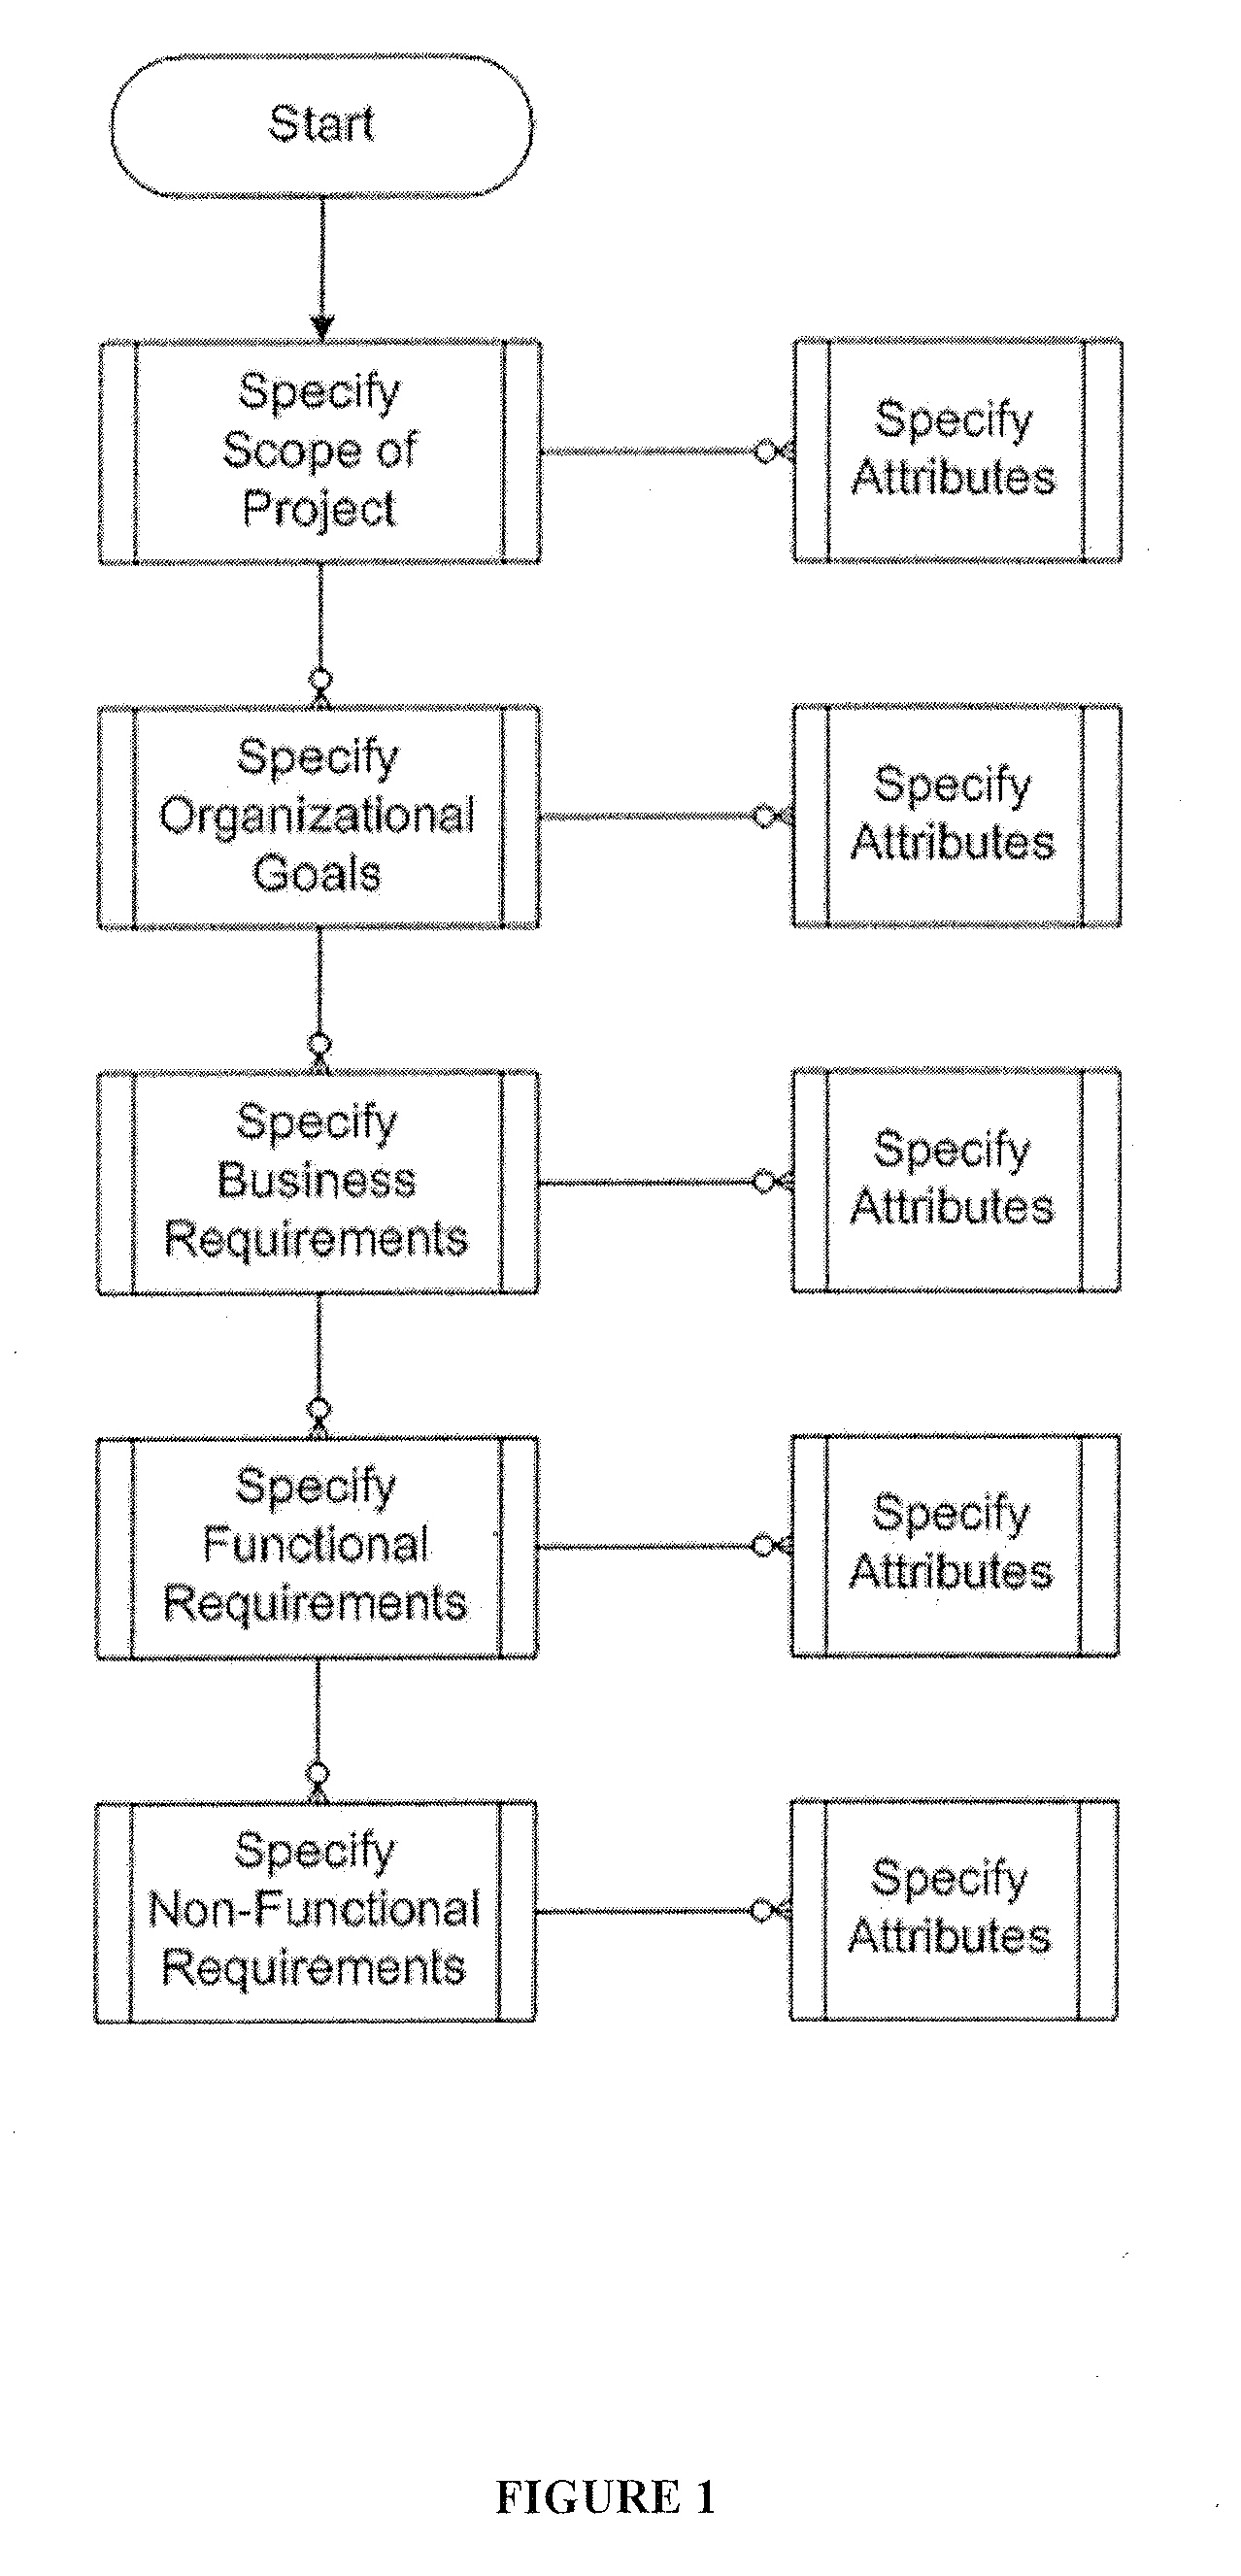 Method for identifying requirements for designing information technology systems